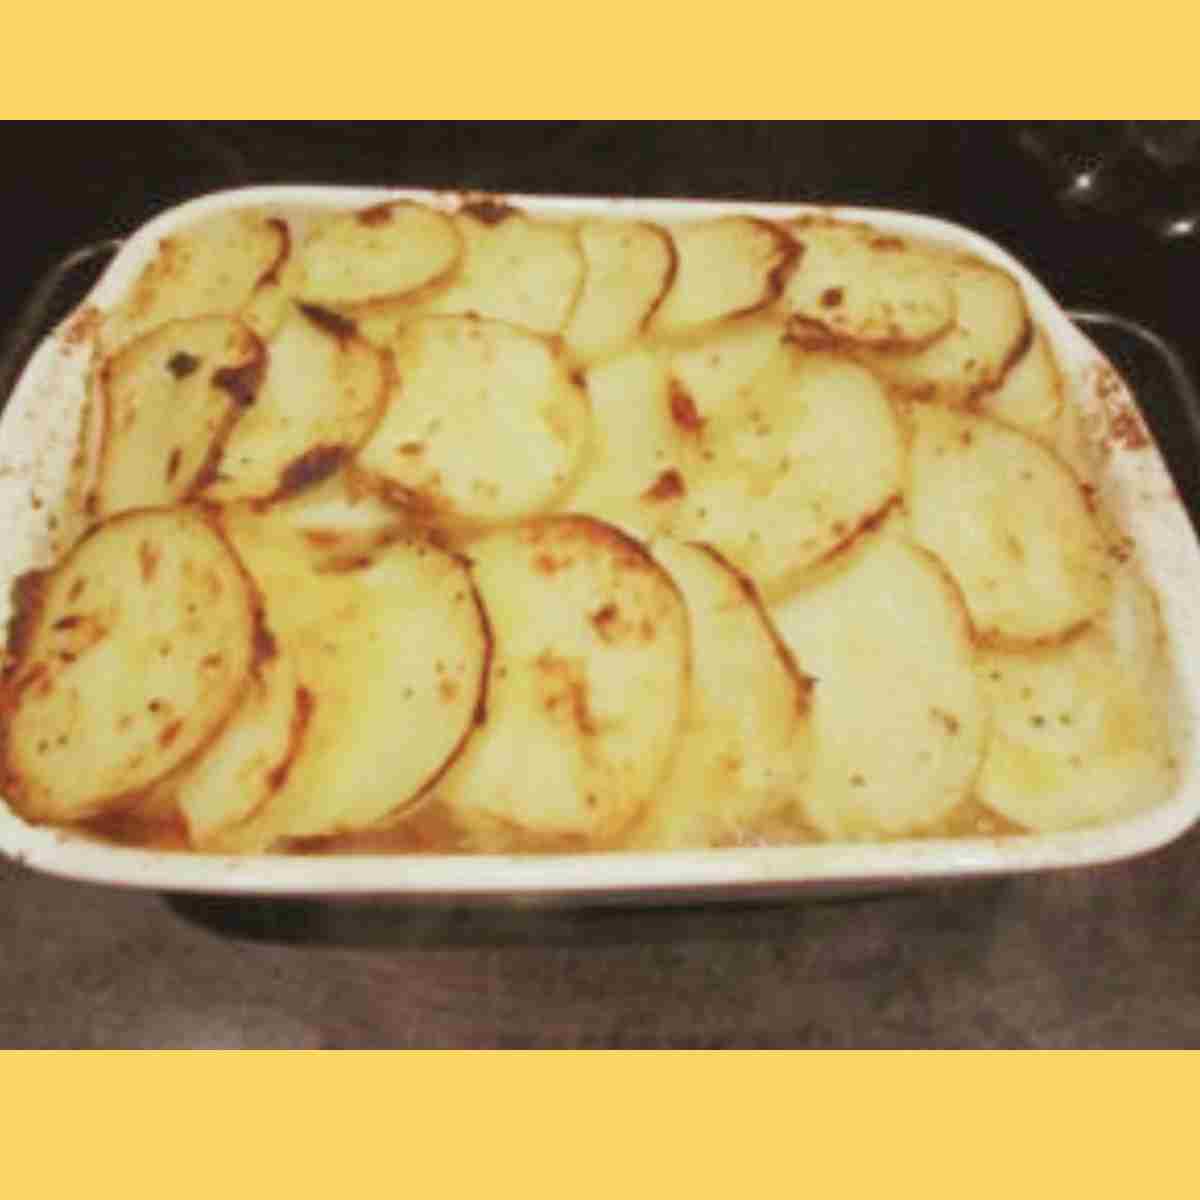 A casserole dish with browned potato slices layered across the top.